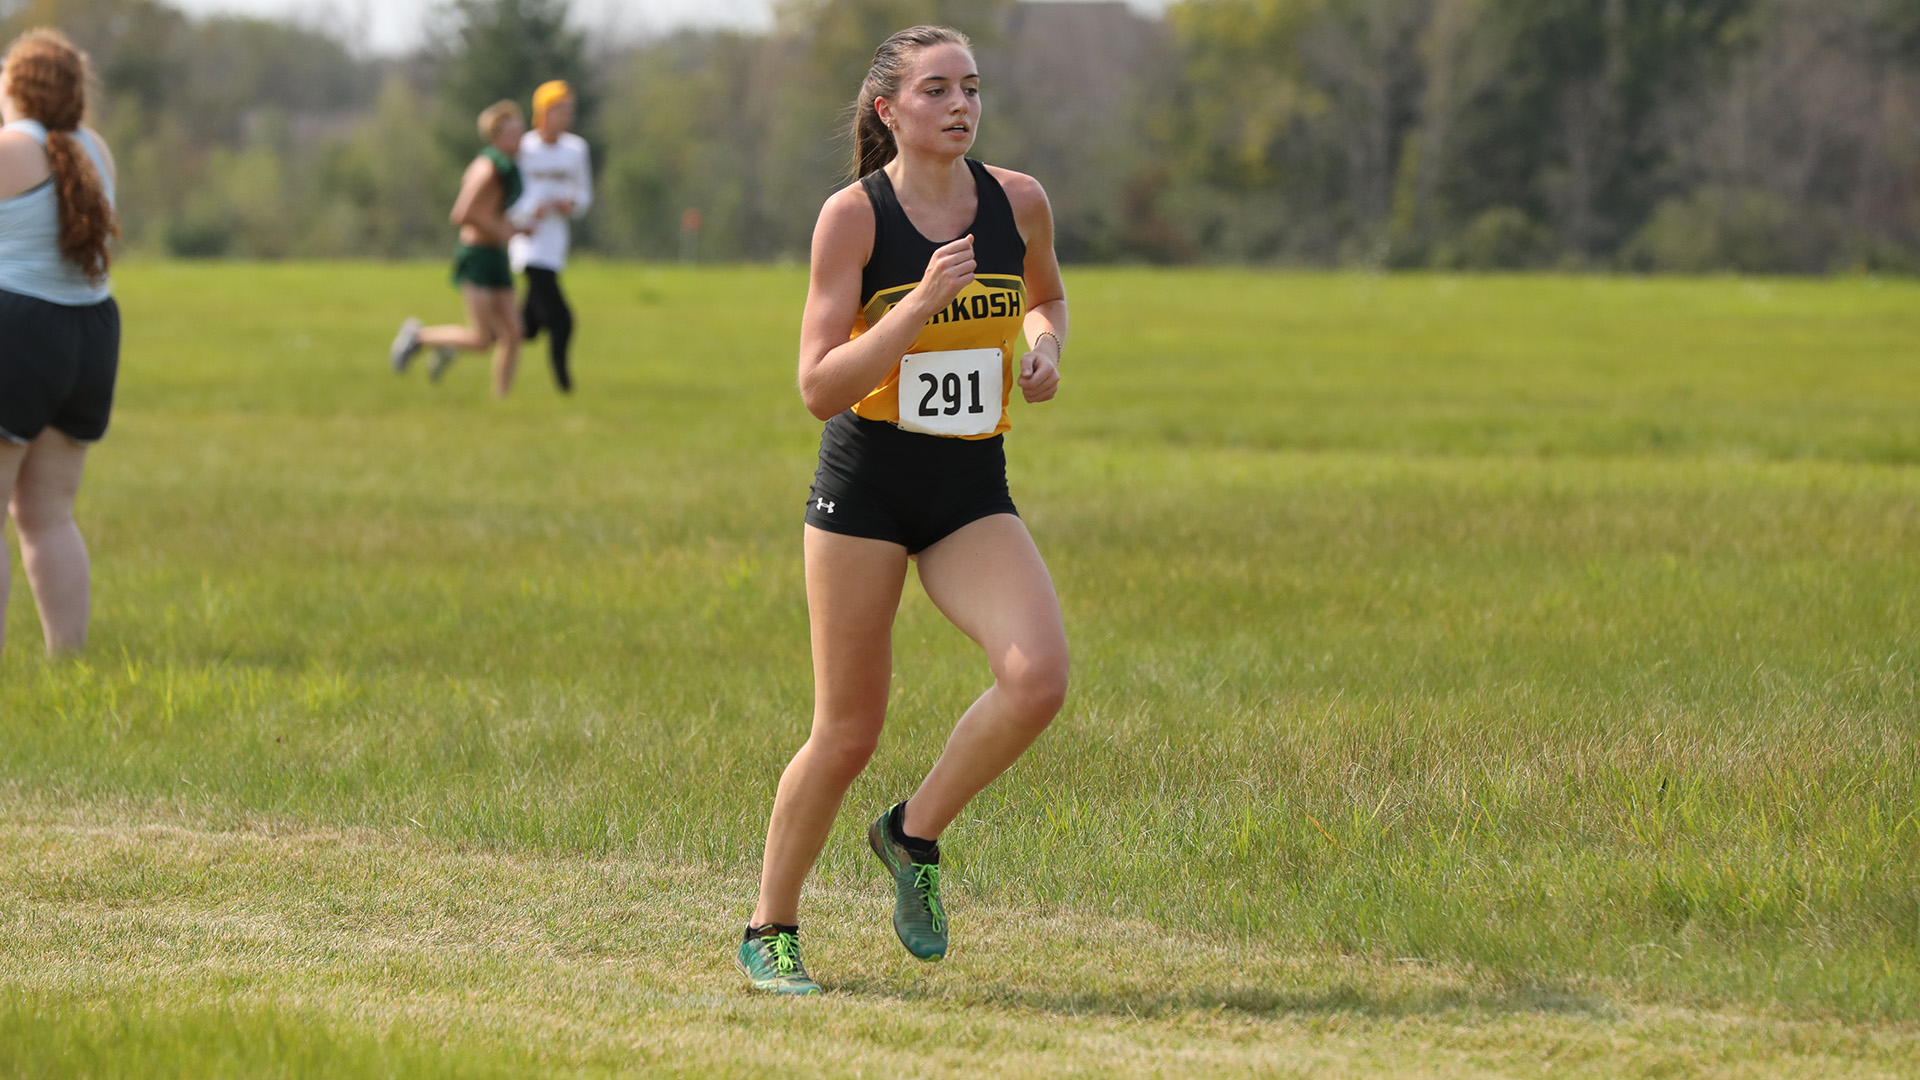 Hannah Lohrenz finished third among 378 runners at the Blugold Invitational with a time of 22:12.78.